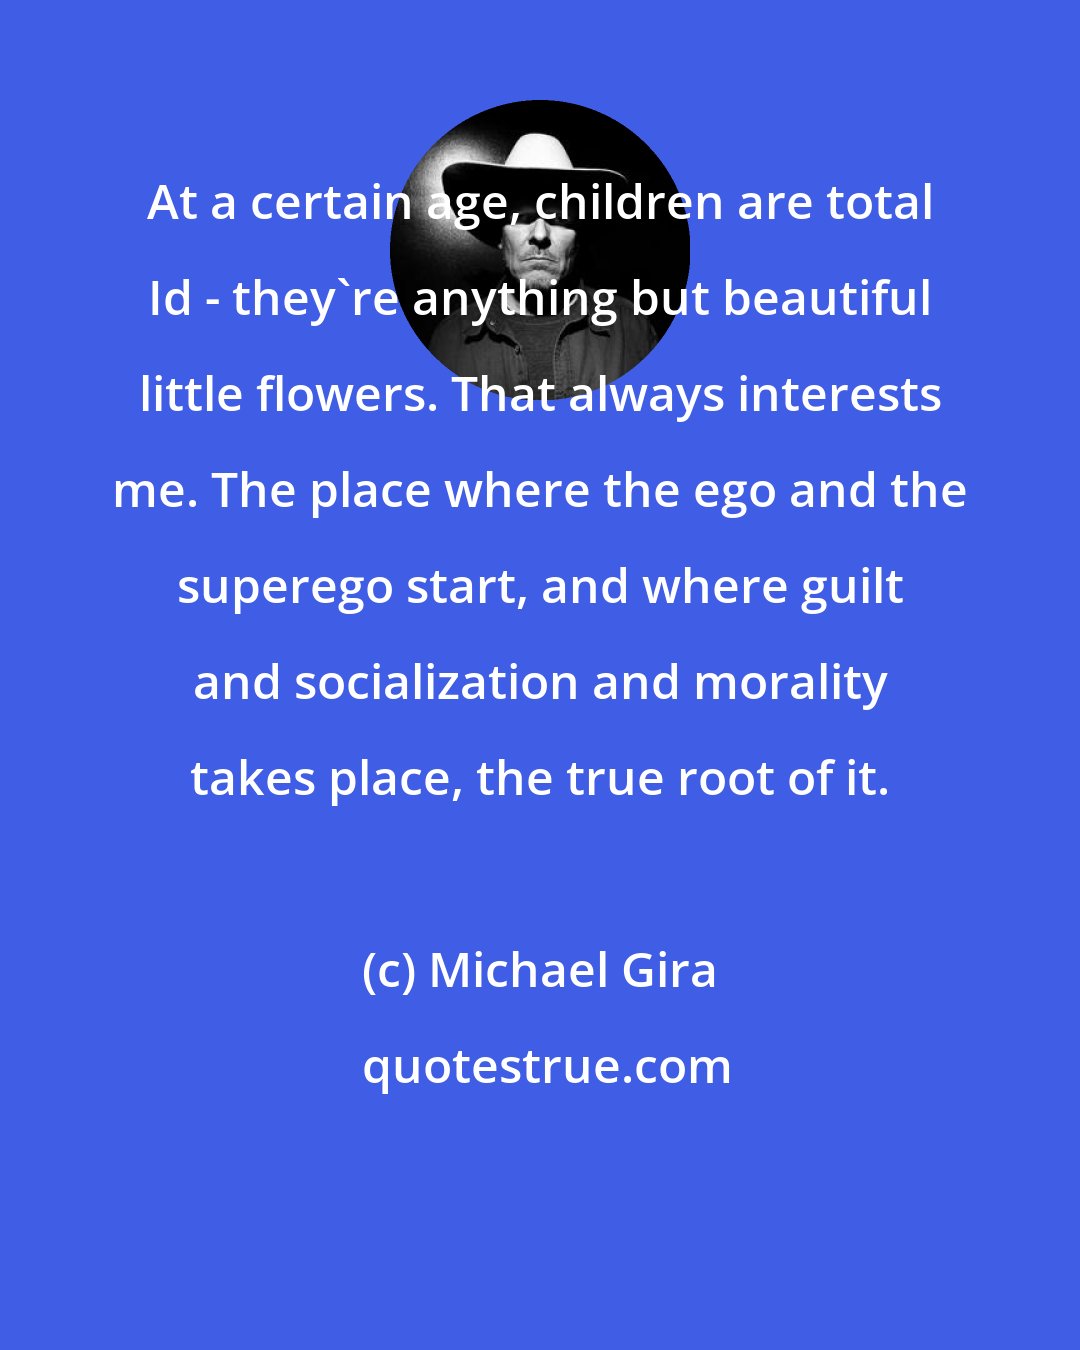 Michael Gira: At a certain age, children are total Id - they're anything but beautiful little flowers. That always interests me. The place where the ego and the superego start, and where guilt and socialization and morality takes place, the true root of it.